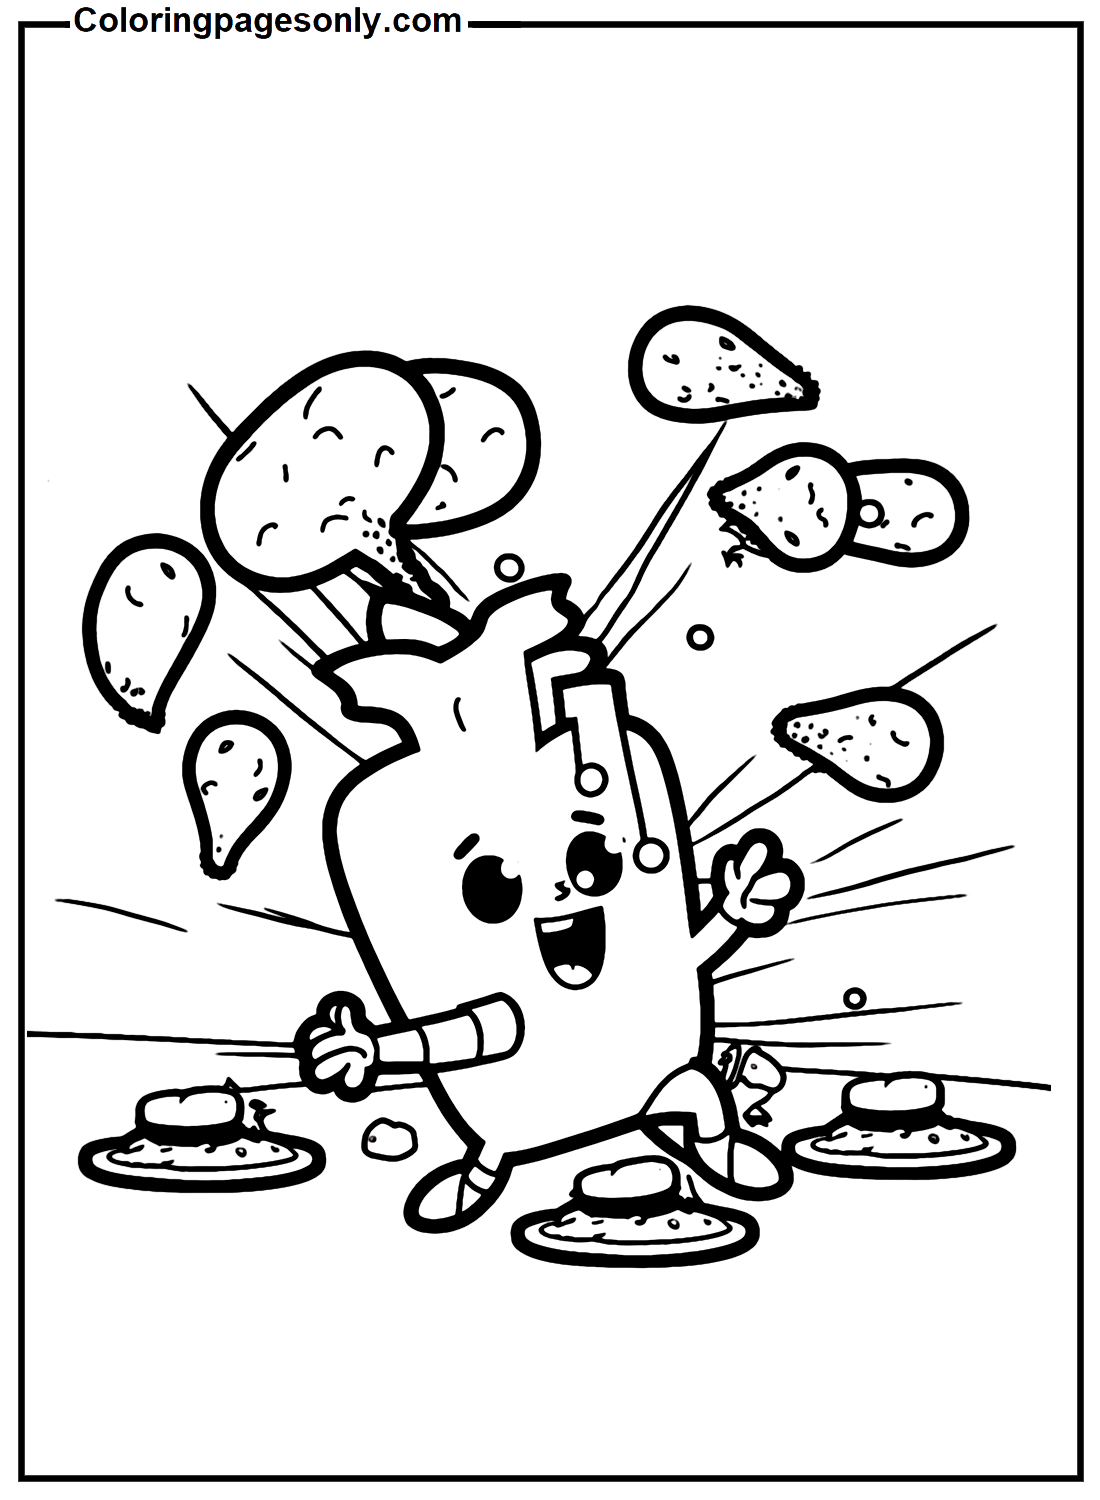 Radish And Cookies Coloring Pages